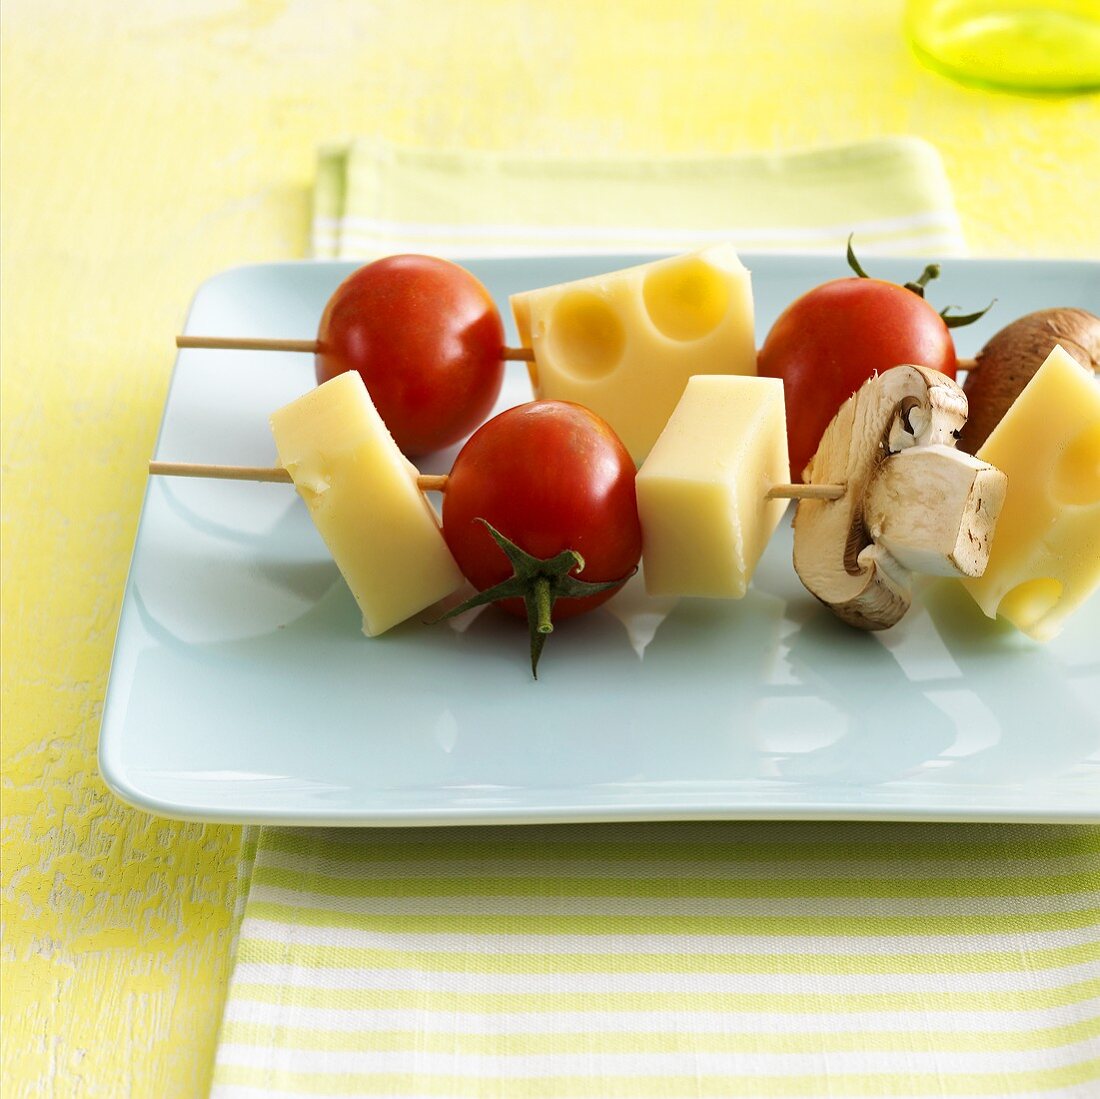 Cheese and vegetable kebabs